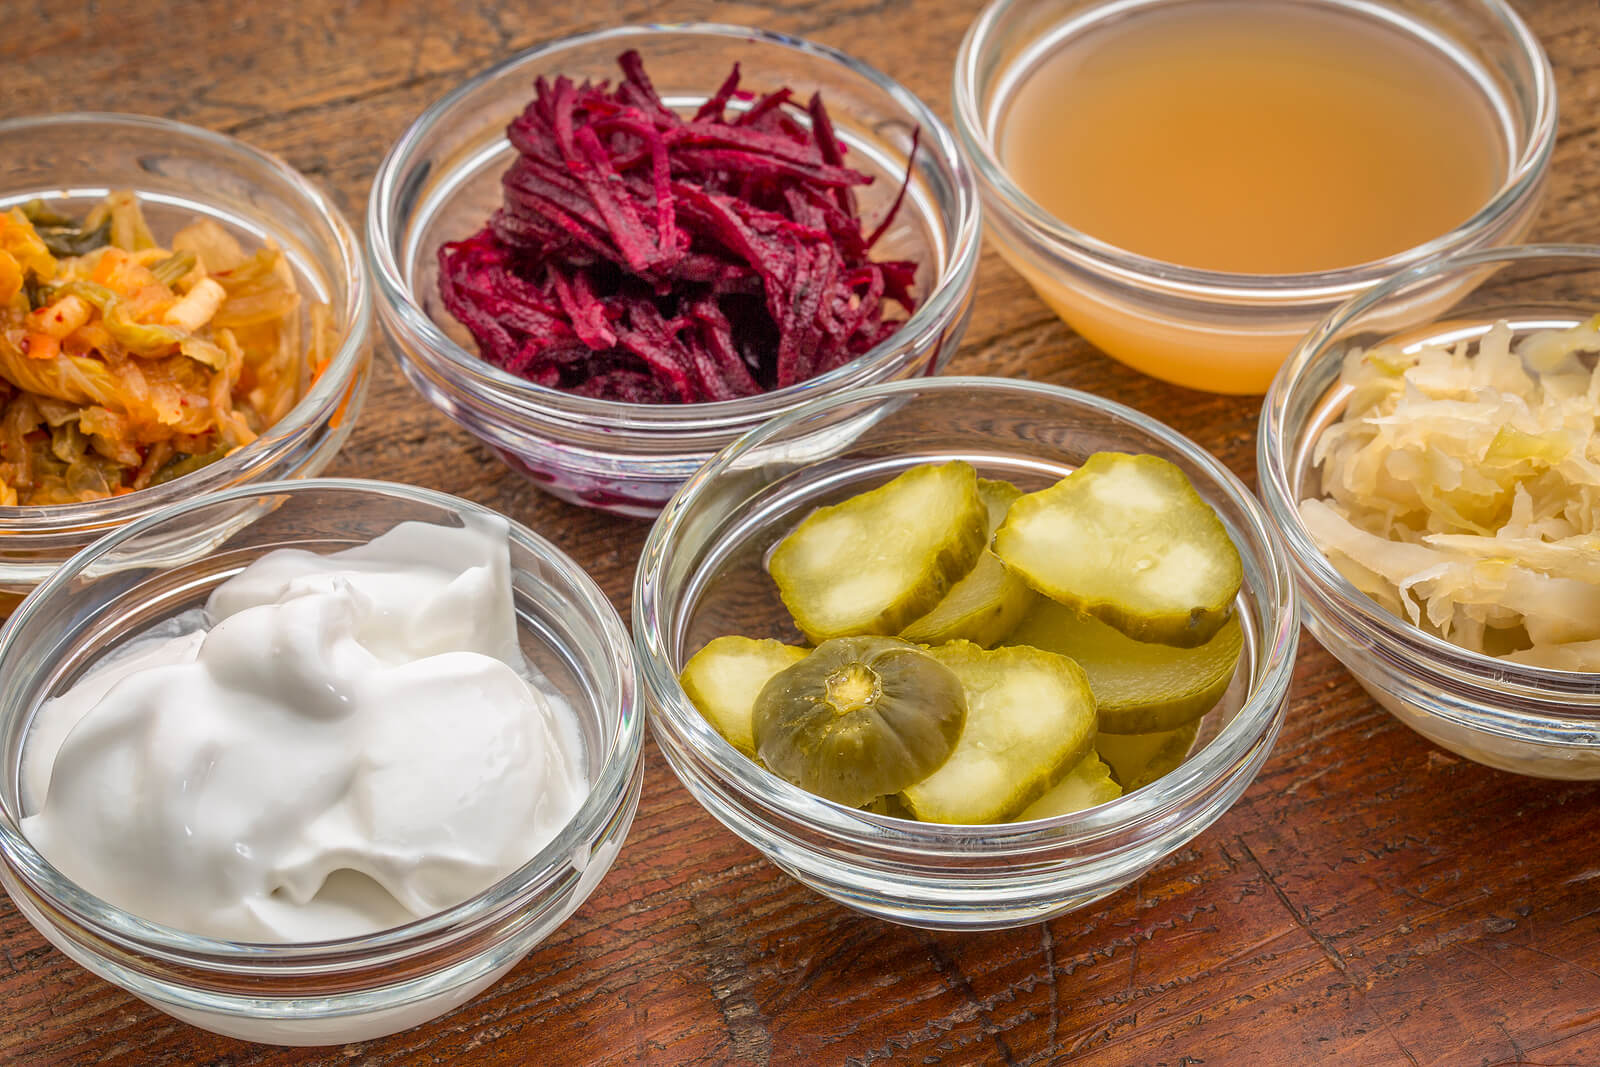 addition of fermented foods in your diet